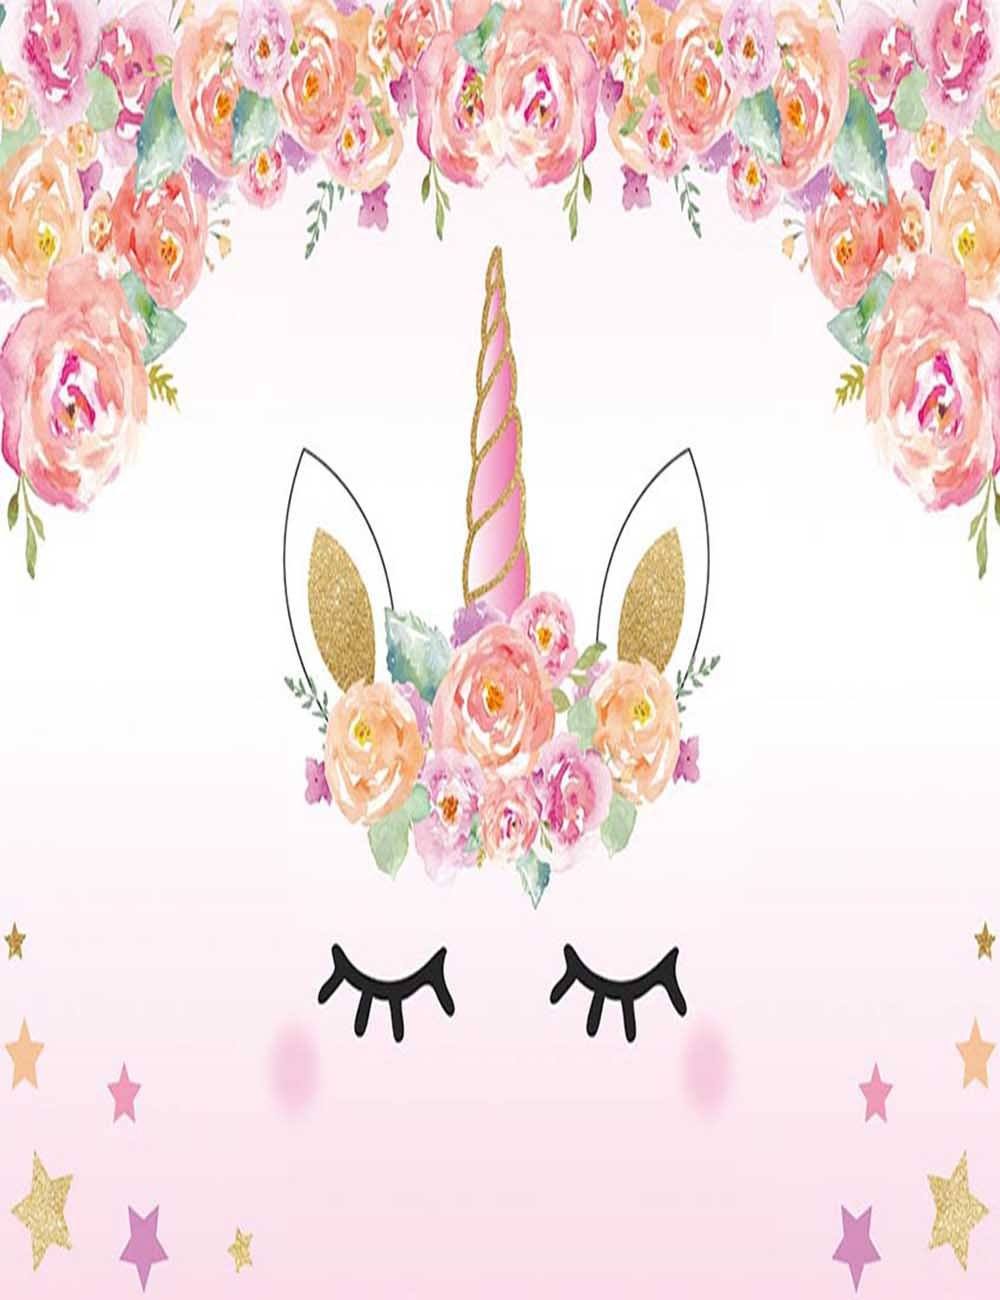 Pink Unicorn Patterned With Flower Star For Baby Show Backdrop Shopbackdrop